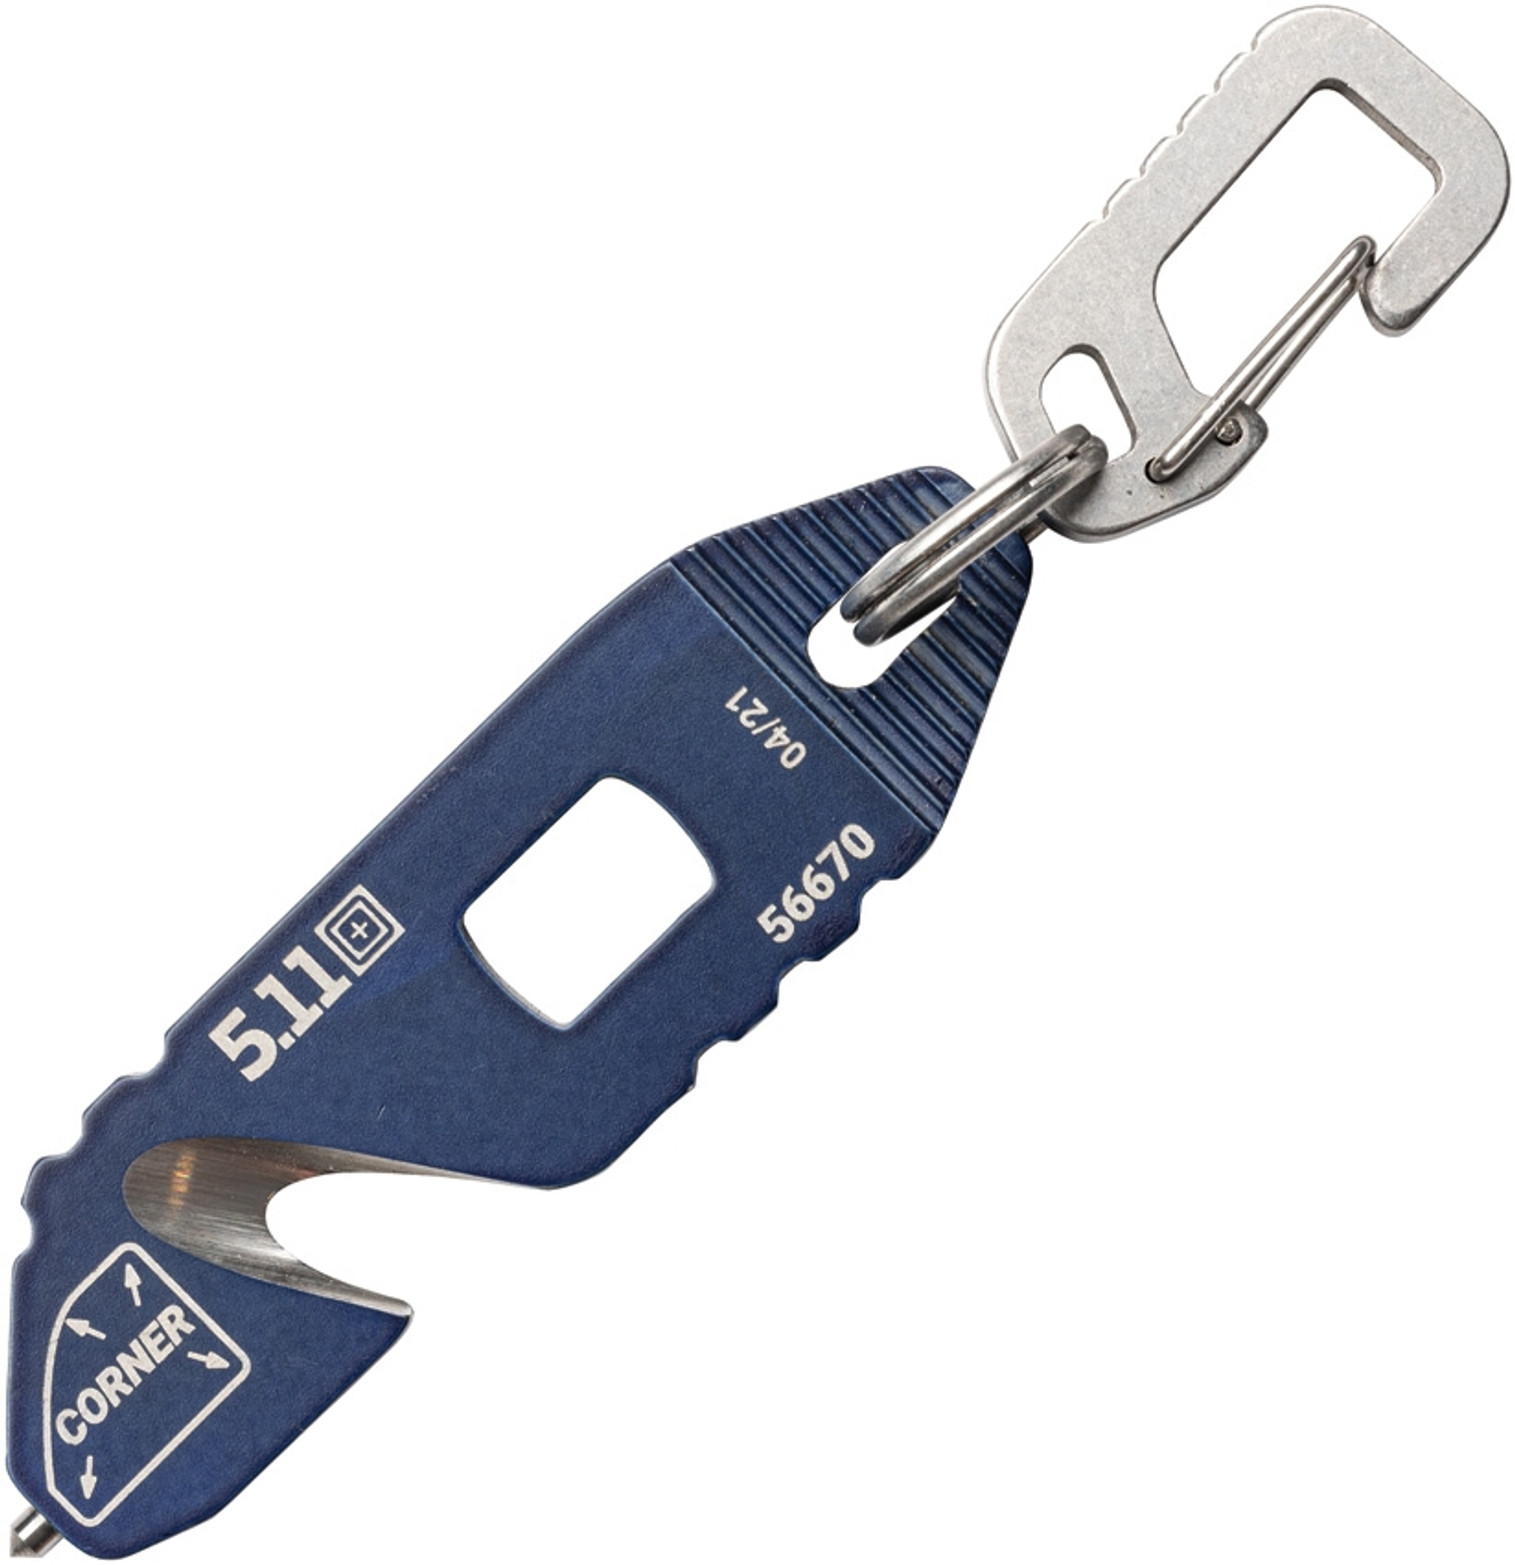 EDT Rescue Keychain Tool